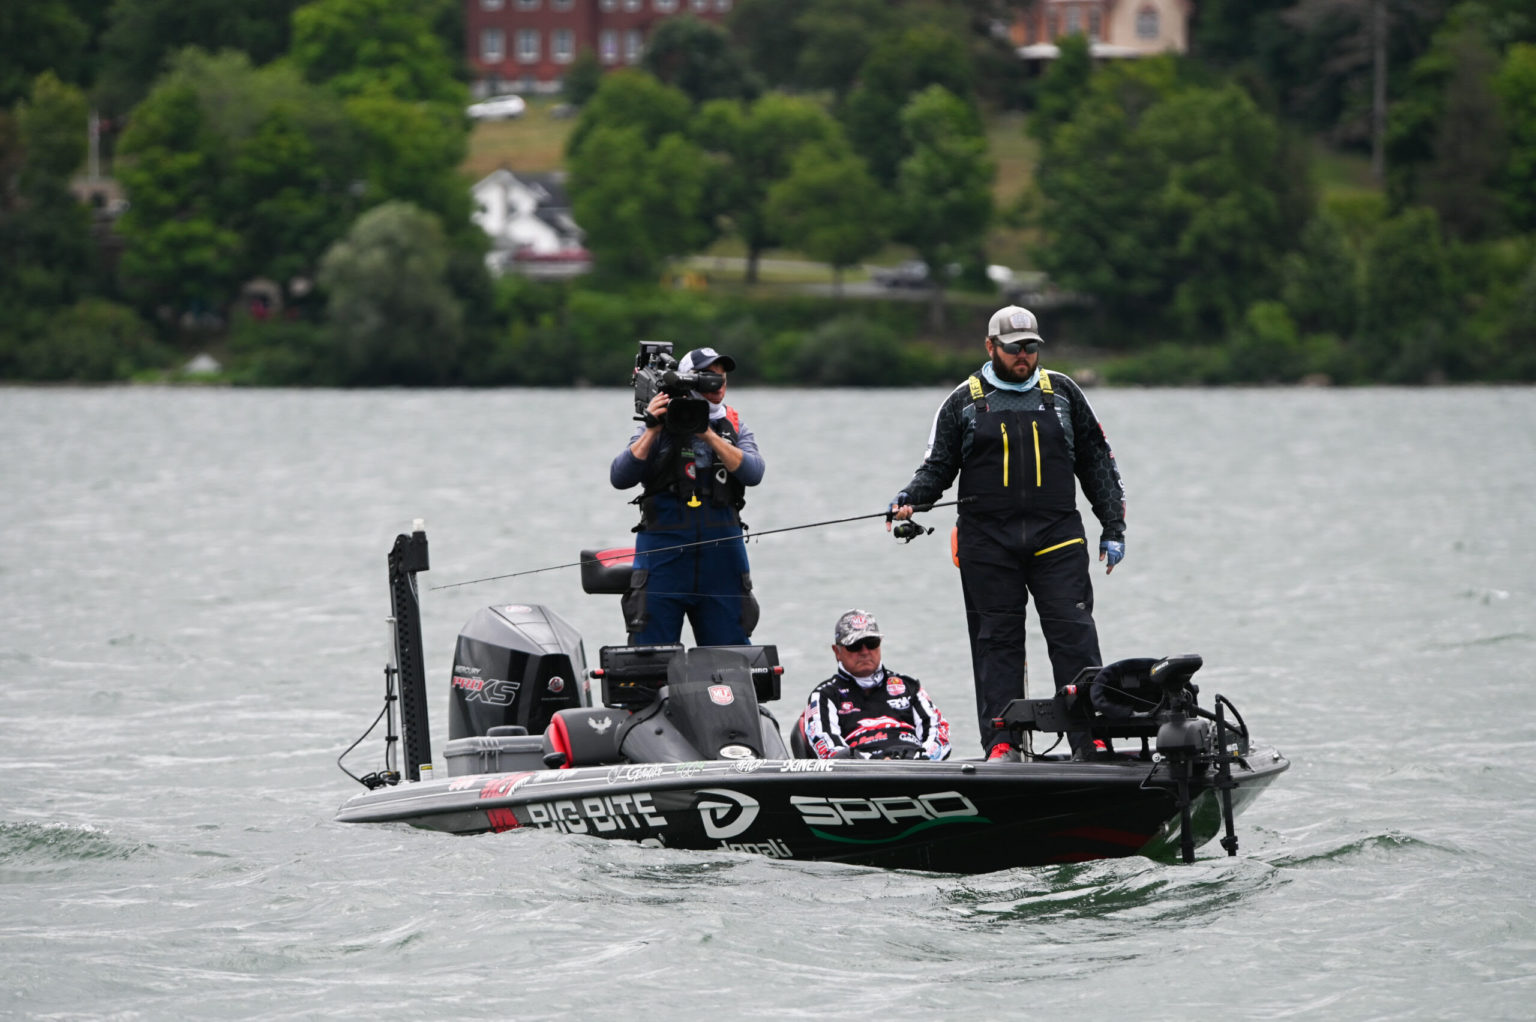 Neal Outlasts Field to Top Group B at MLF Bass Pro Tour Fox Rent A Car